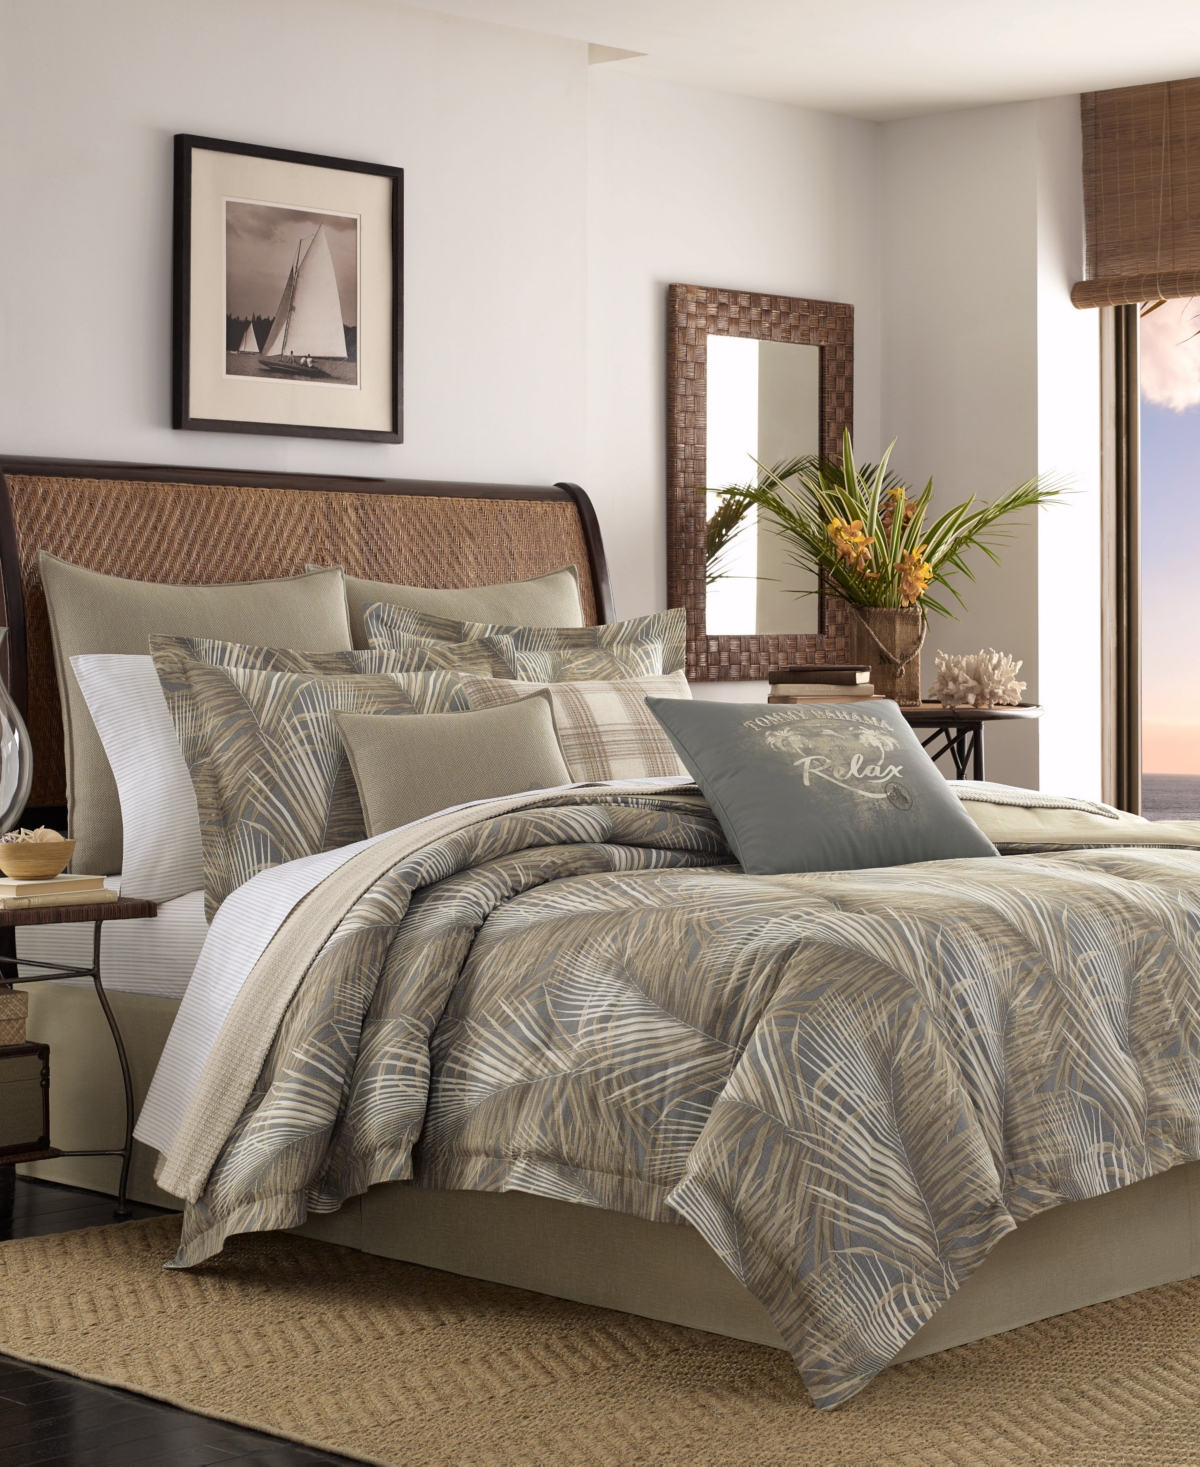 Tommy Bahama Raffia Palms Reversible Comforter Set, Queen In Pewter Brown